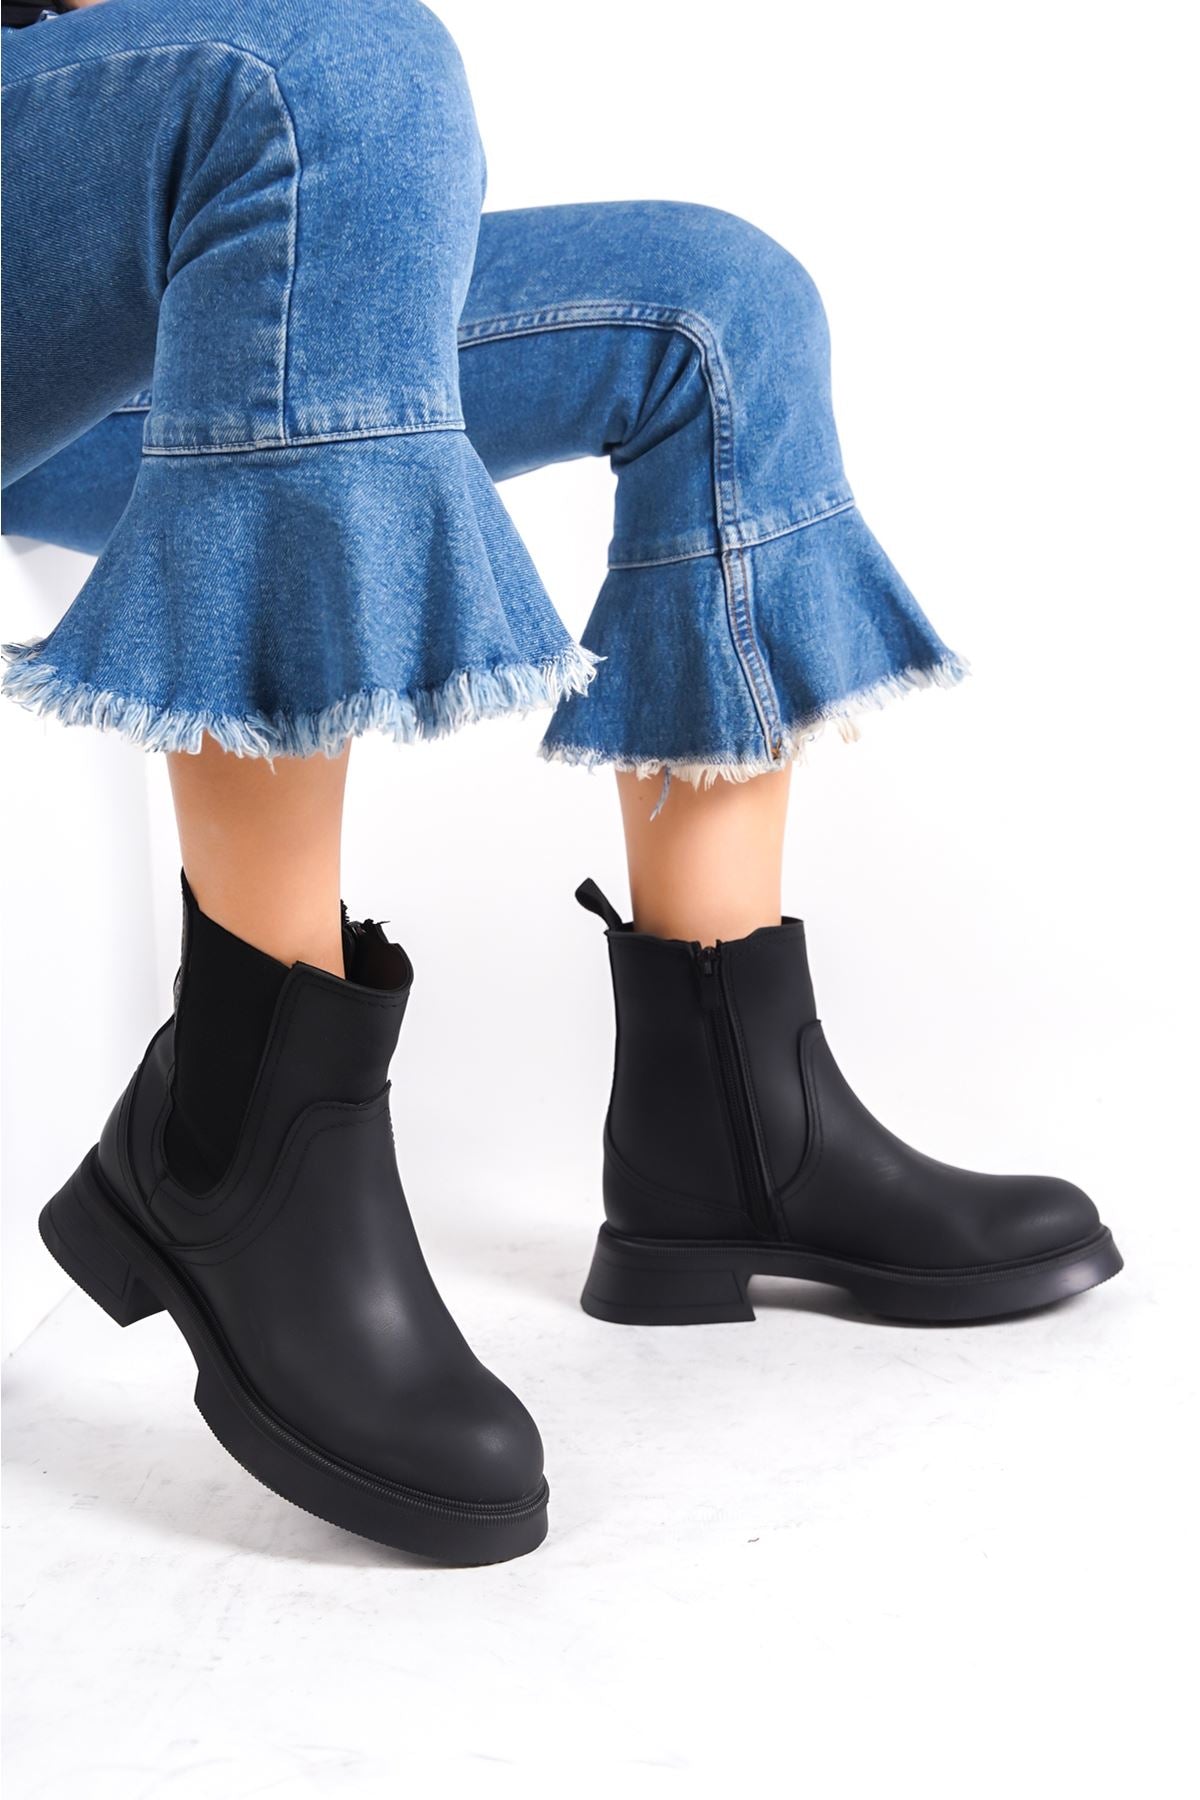 Dalpa Black Women's Boots with Elastic Sides - STREETMODE™